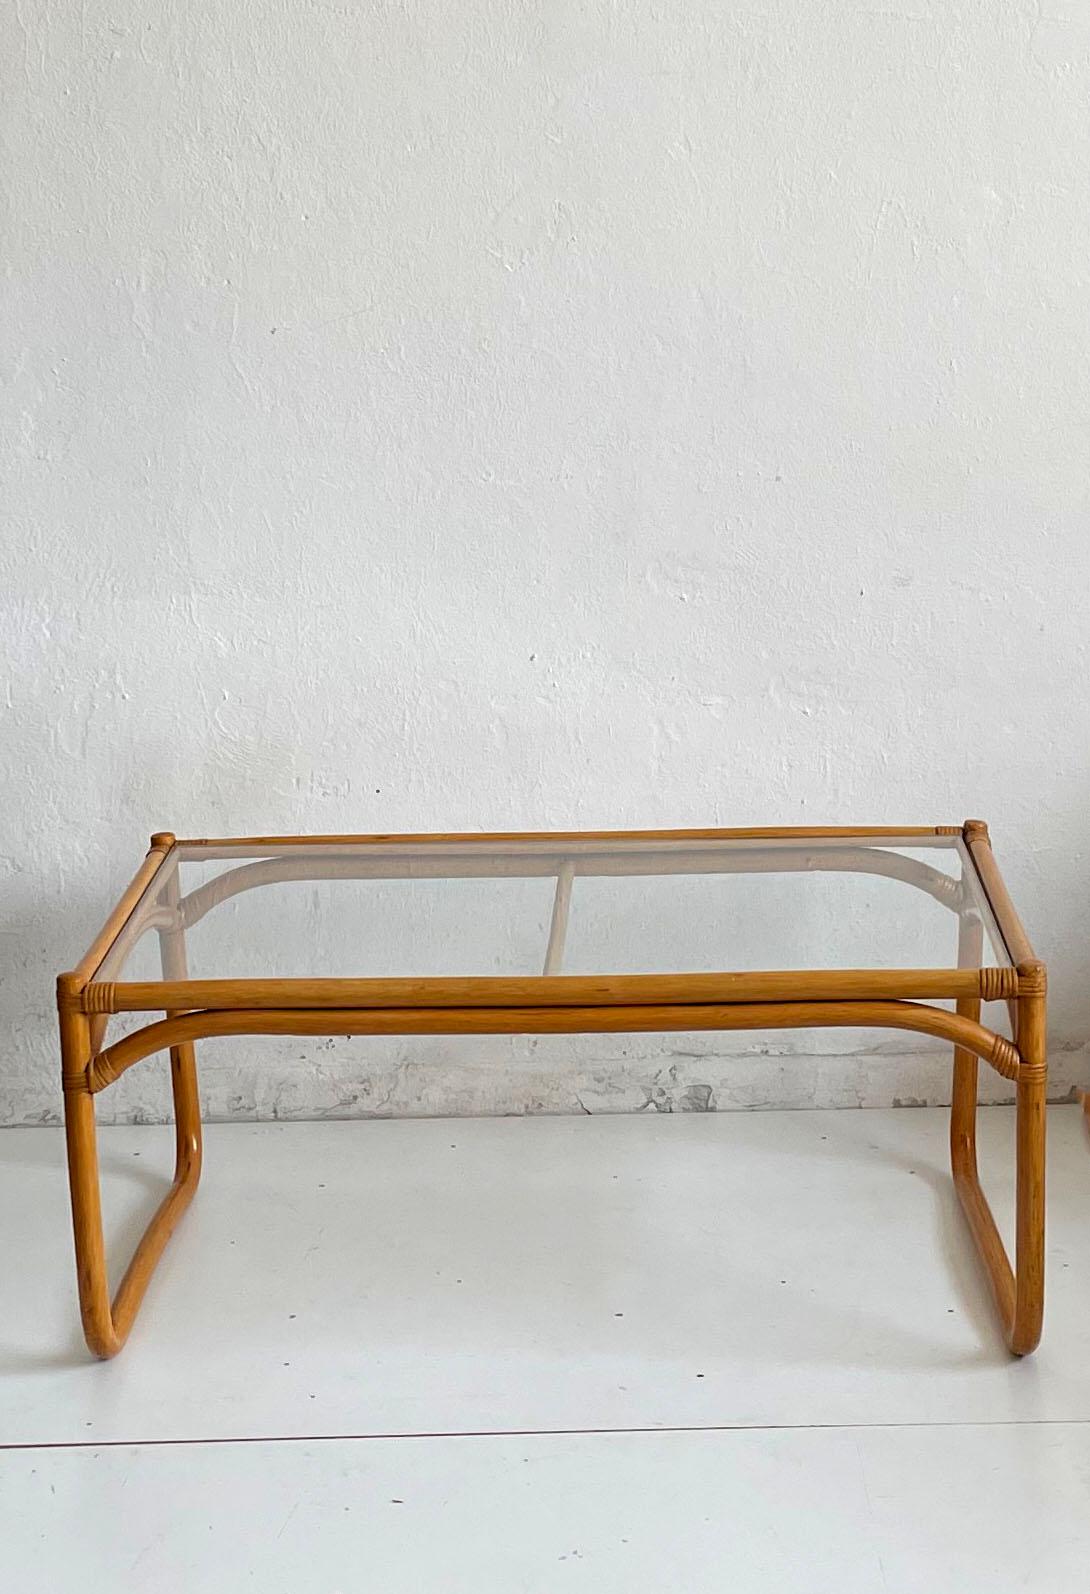 Large vintage mid-century coffee table from Scandinavia, ca 1970s

The table features a sturdy frame made of bamboo and a clear glass tabletop

The table remains in a very good original condition, the glass is without any defects and